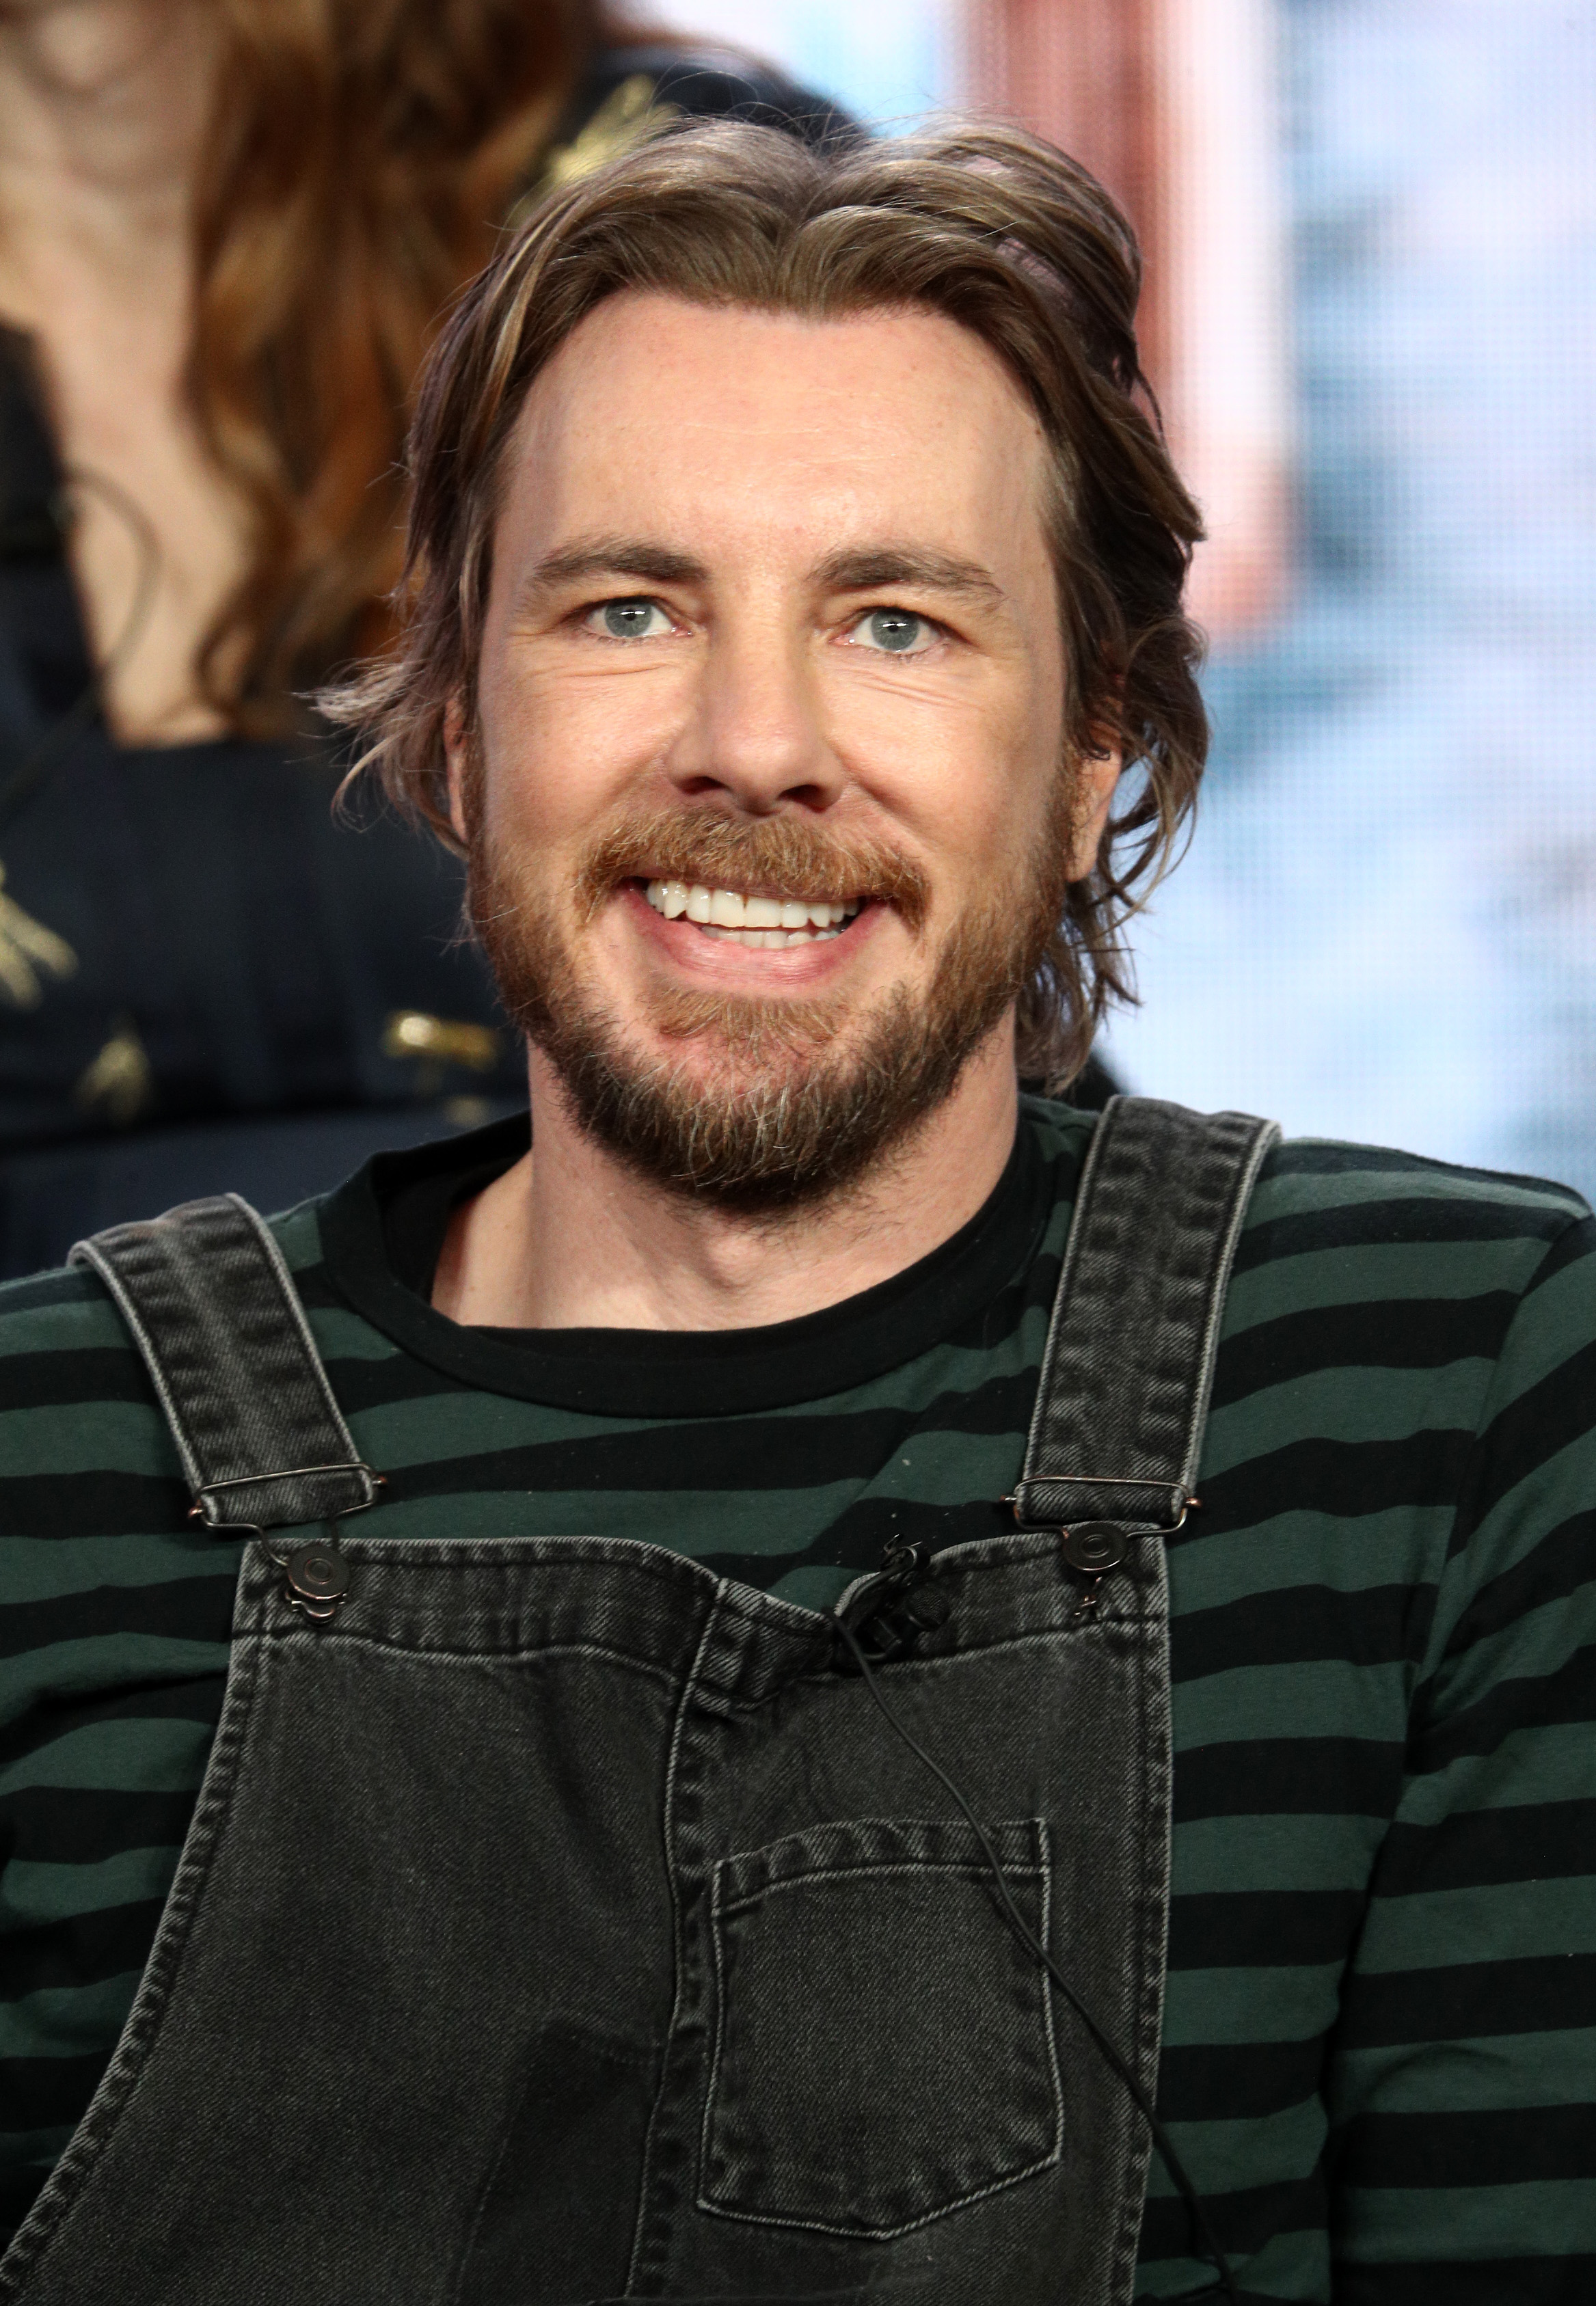 Dax Shepard speaking at the Winter Television Critics Association Press Tour in Pasadena, California on February 5, 2019 | Source: Getty Images